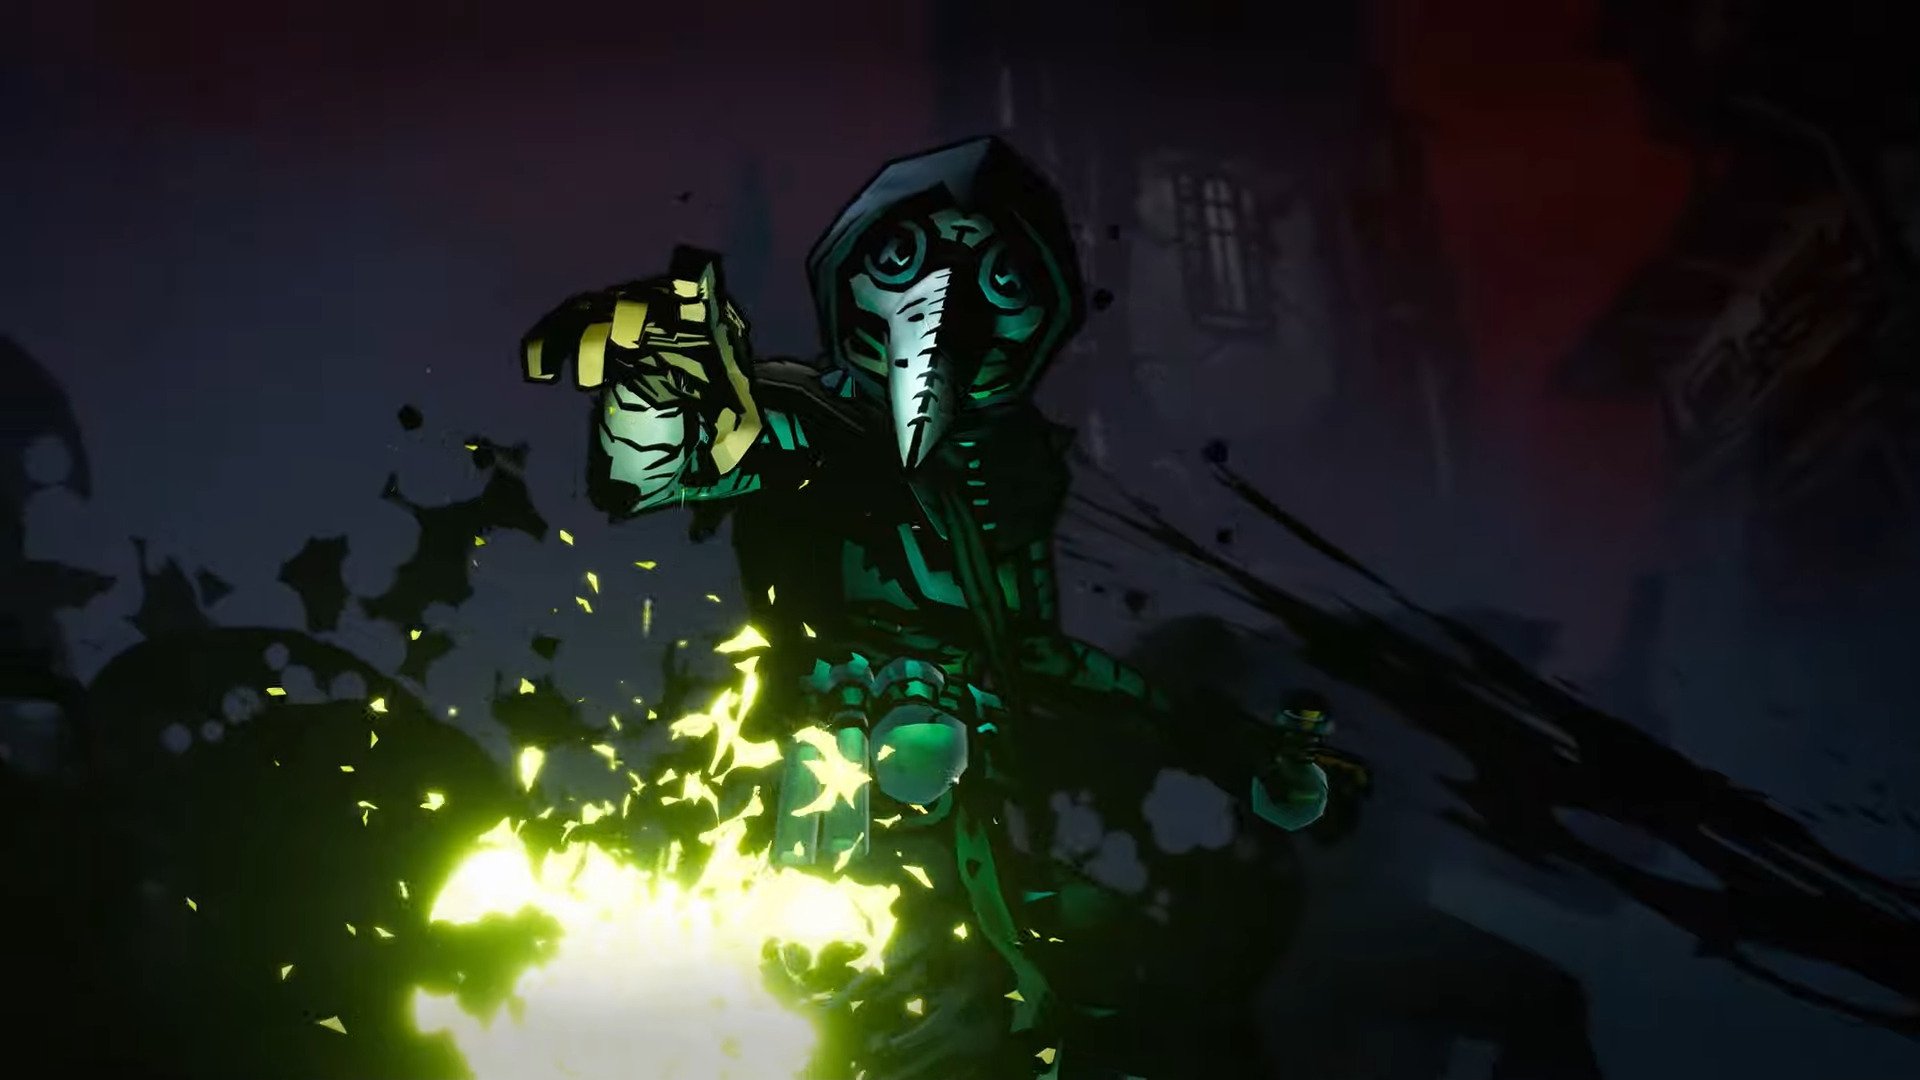 when is darkest dungeon 2 coming to early acess, and how much will it cost